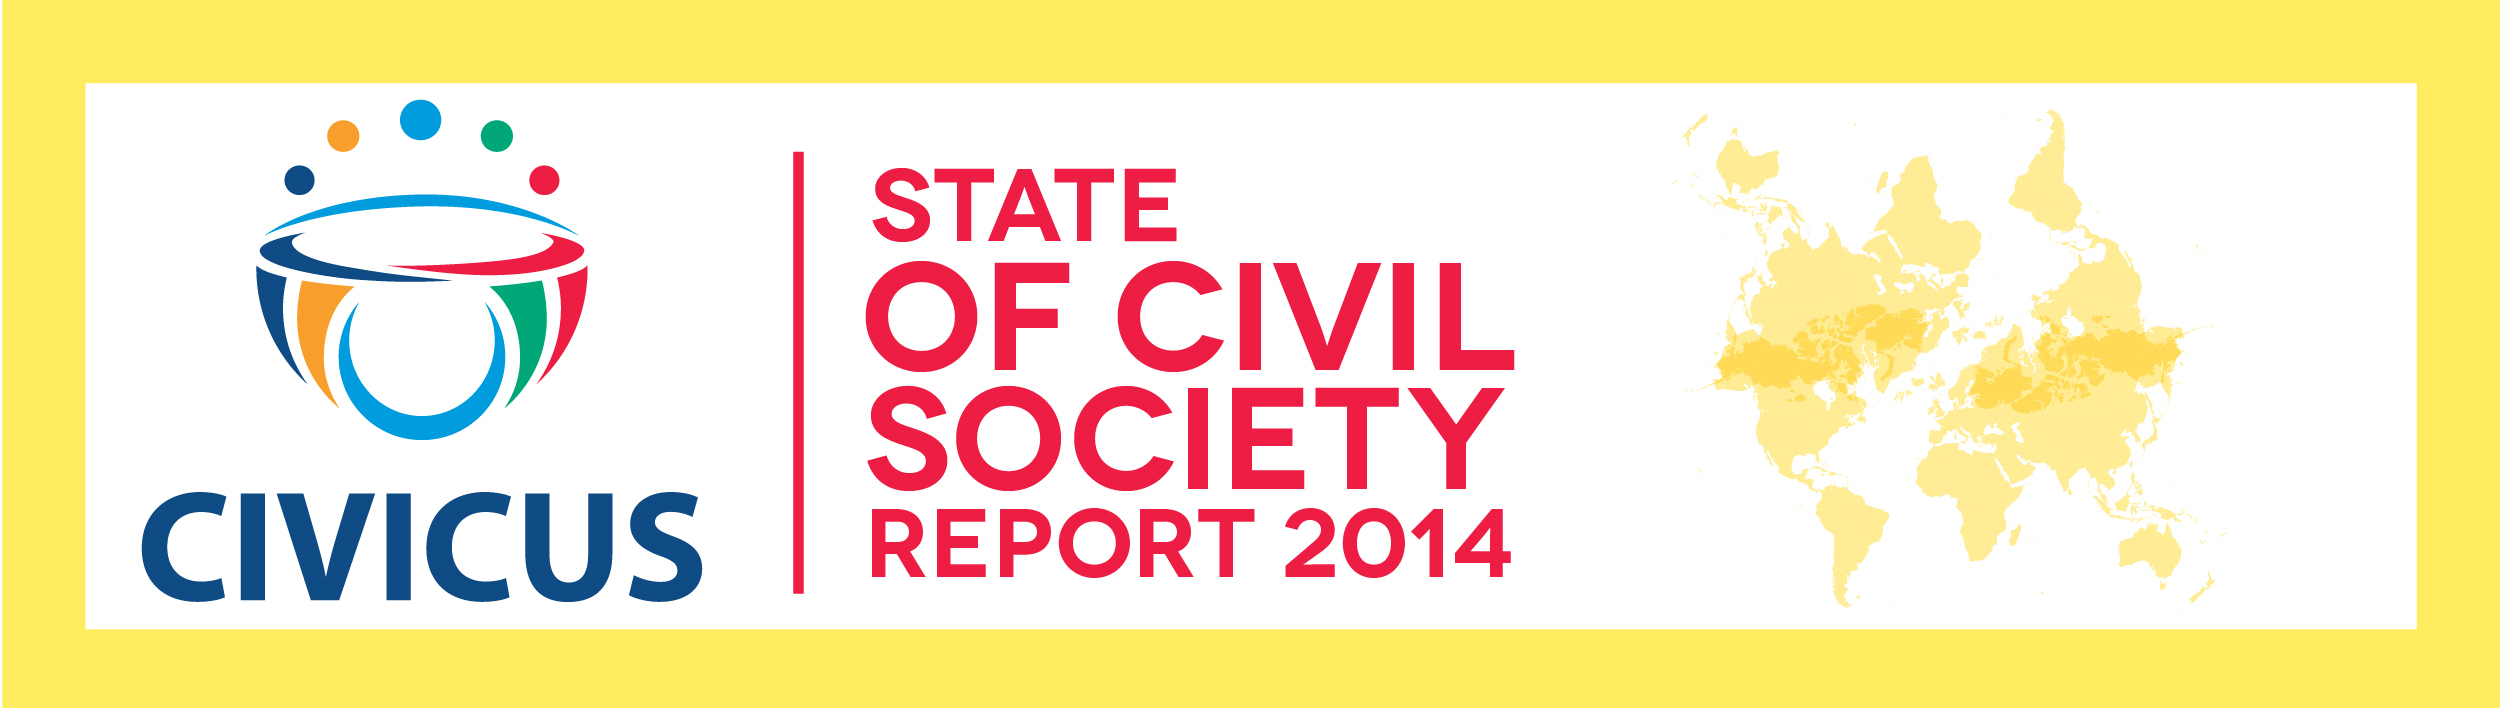 State of civil society report 2014